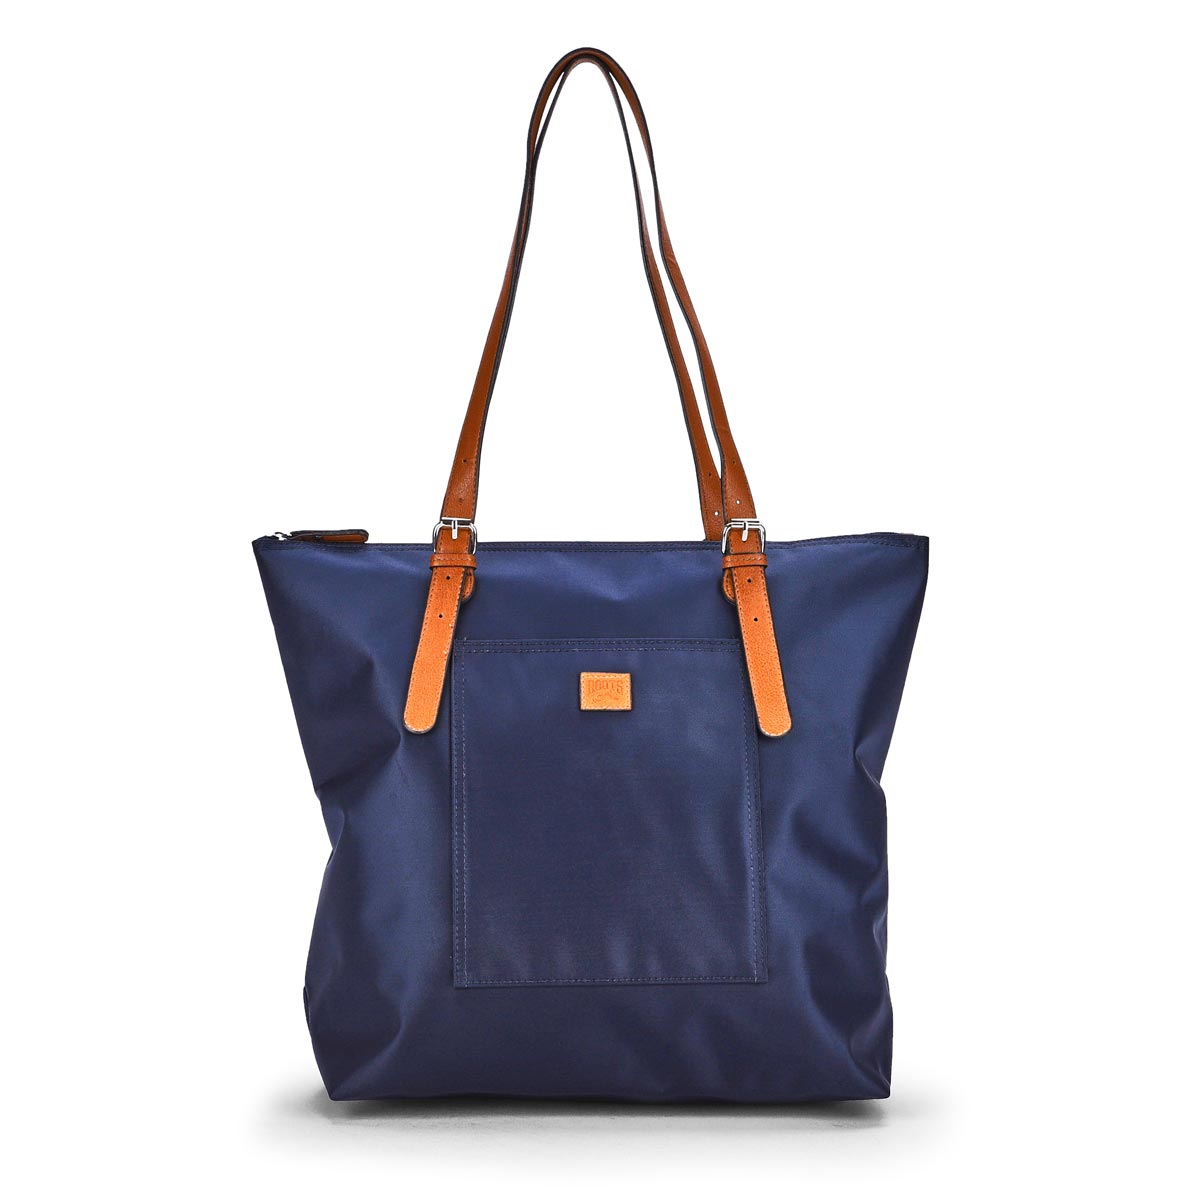 Roots Women's 2 in 1 Tote/Crossbody Bag - Na | SoftMoc.com